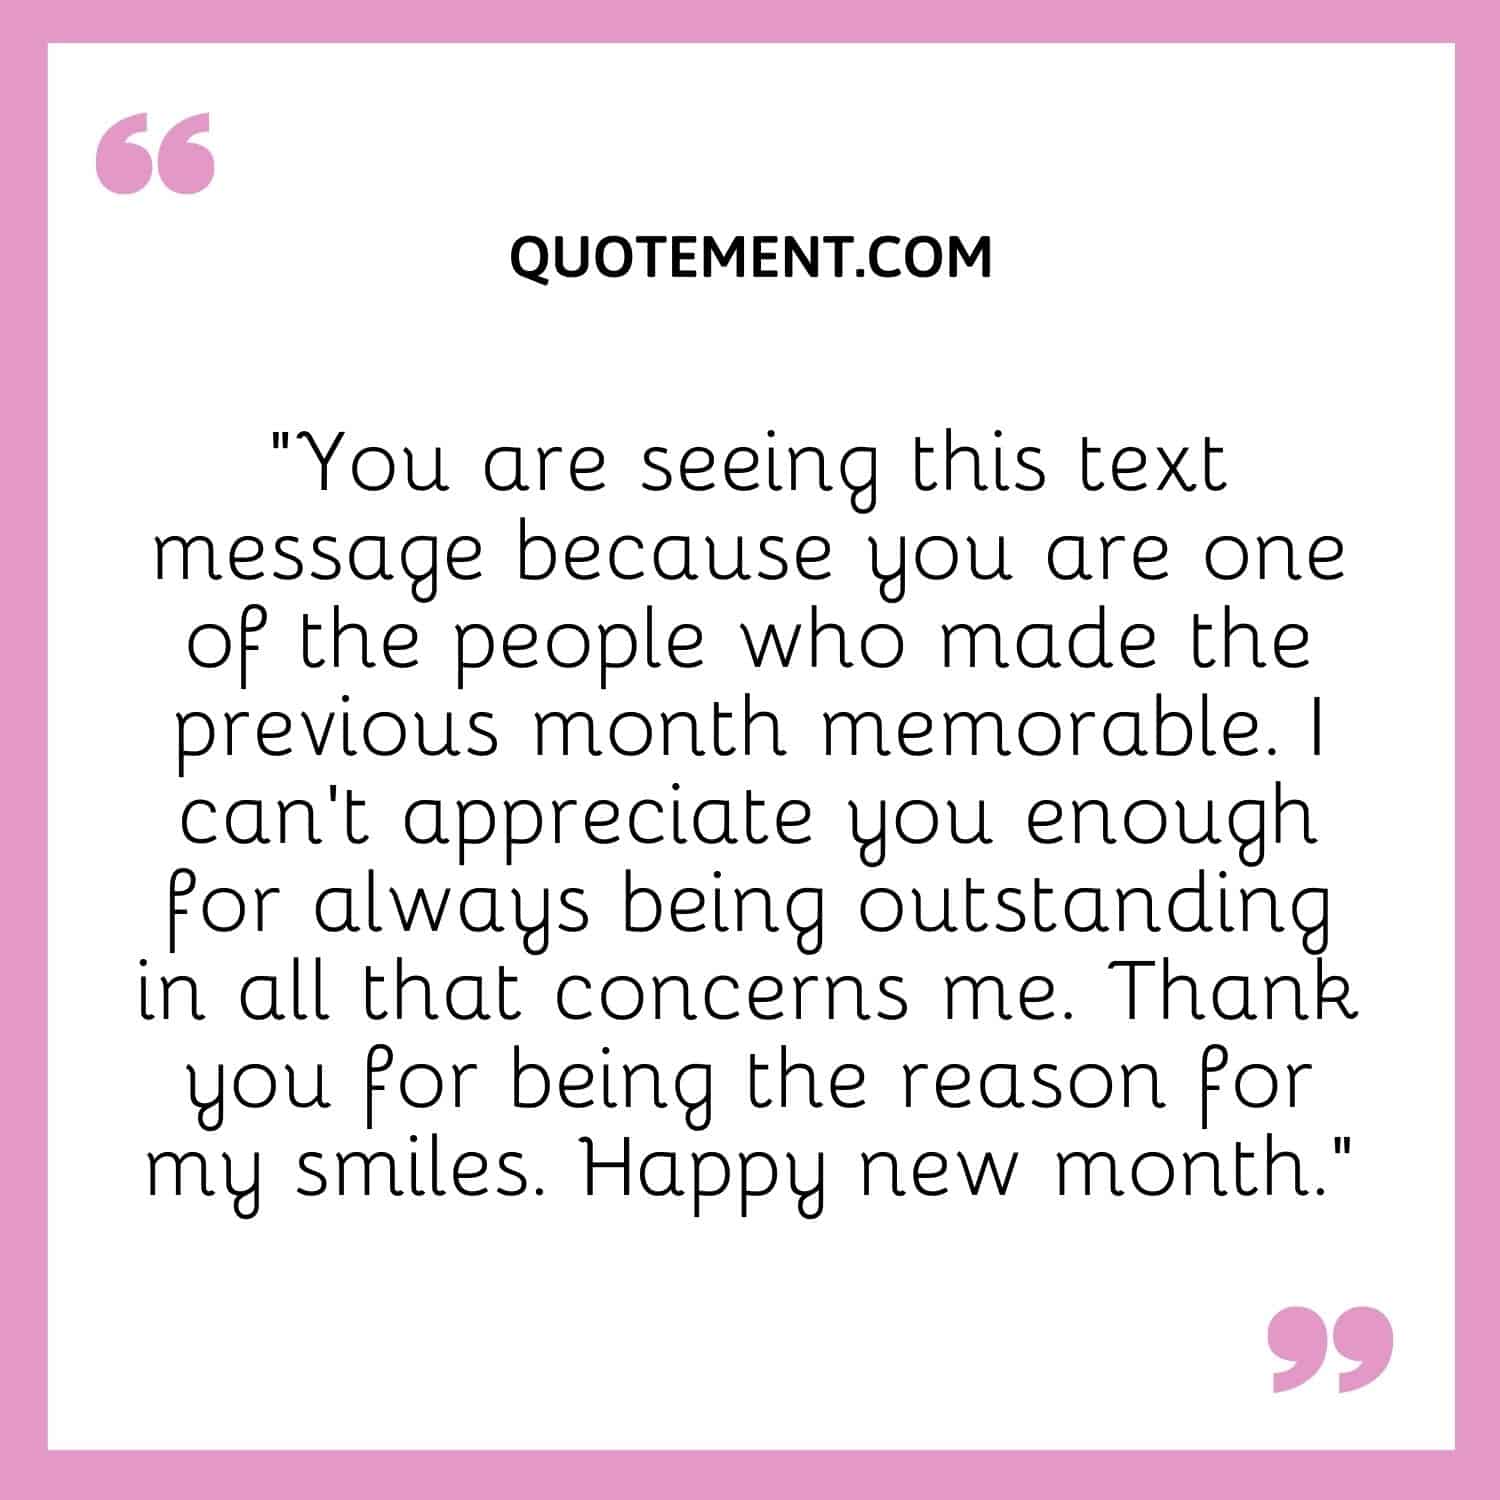 You are seeing this text message because you are one of the people who made the previous month memorable.